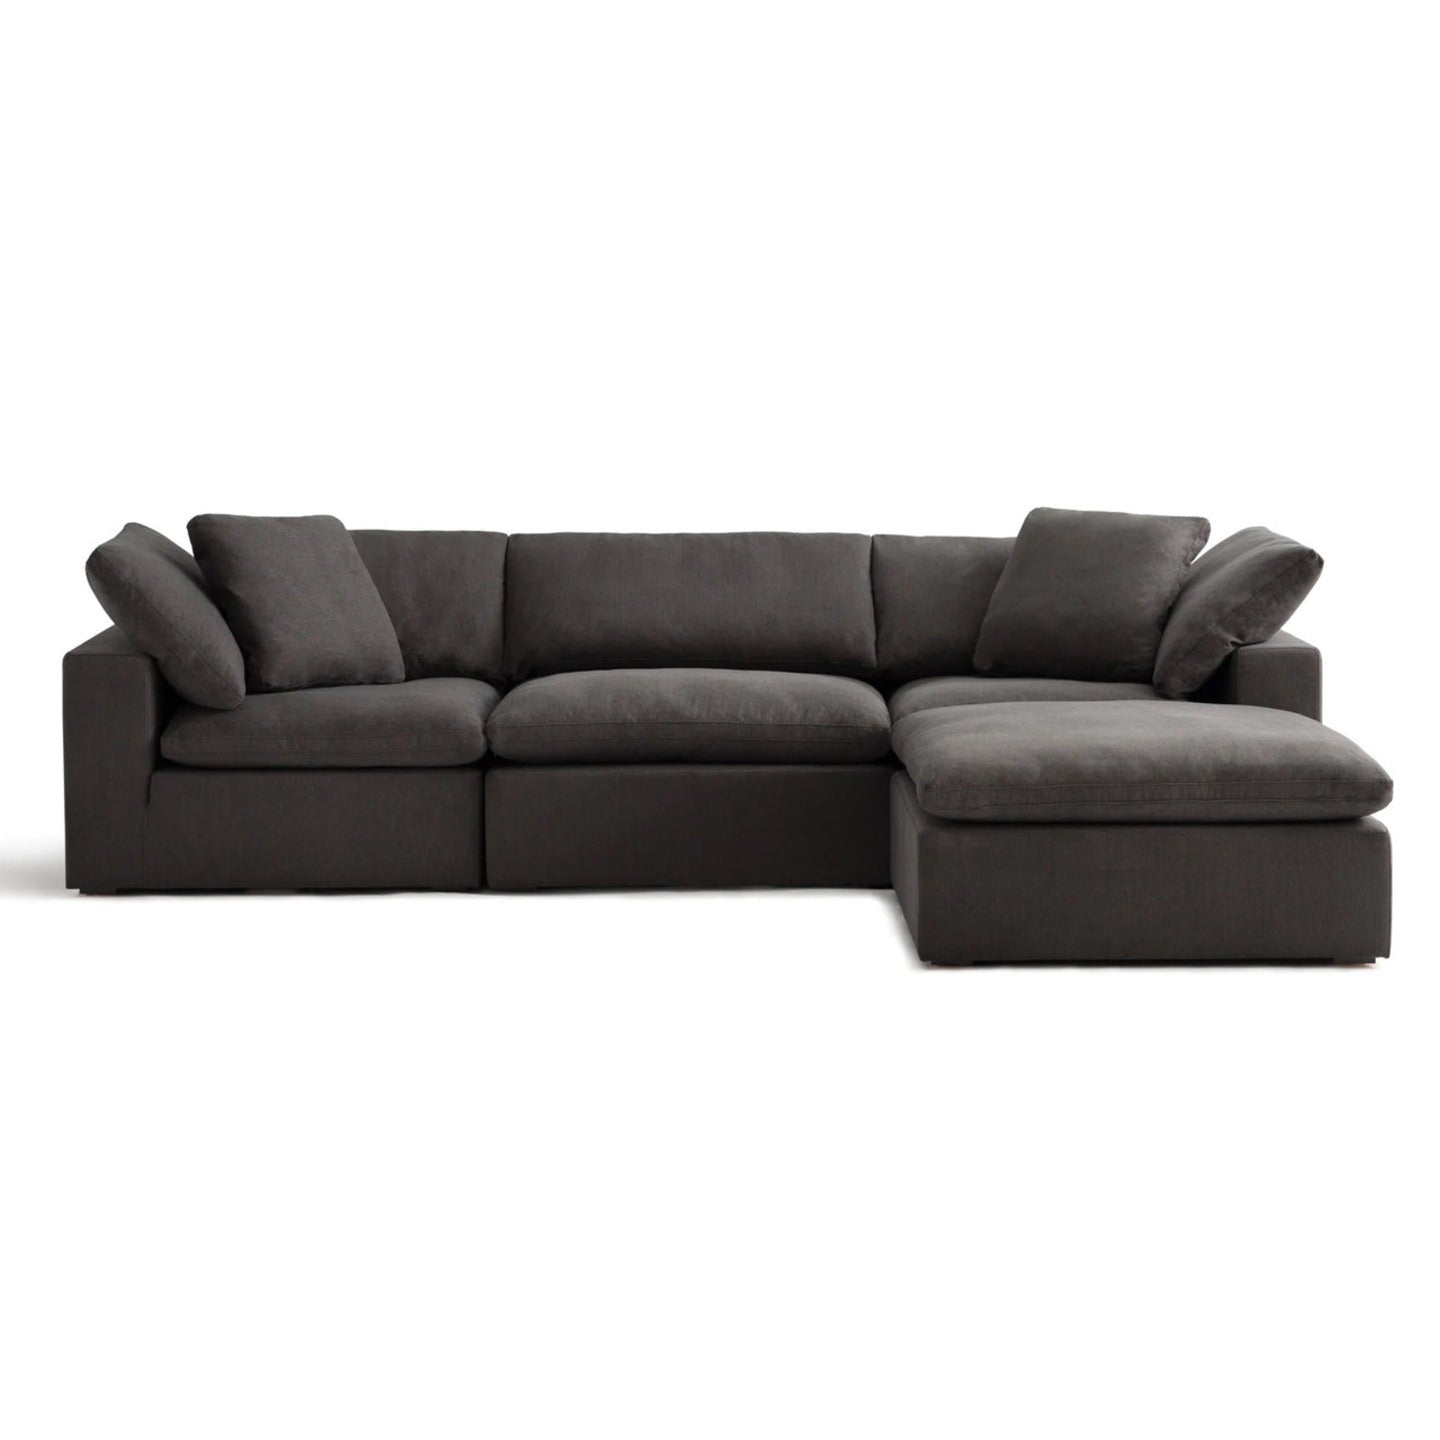 Haven 3 Seater Sectional Sofa With Ottoman, Gray